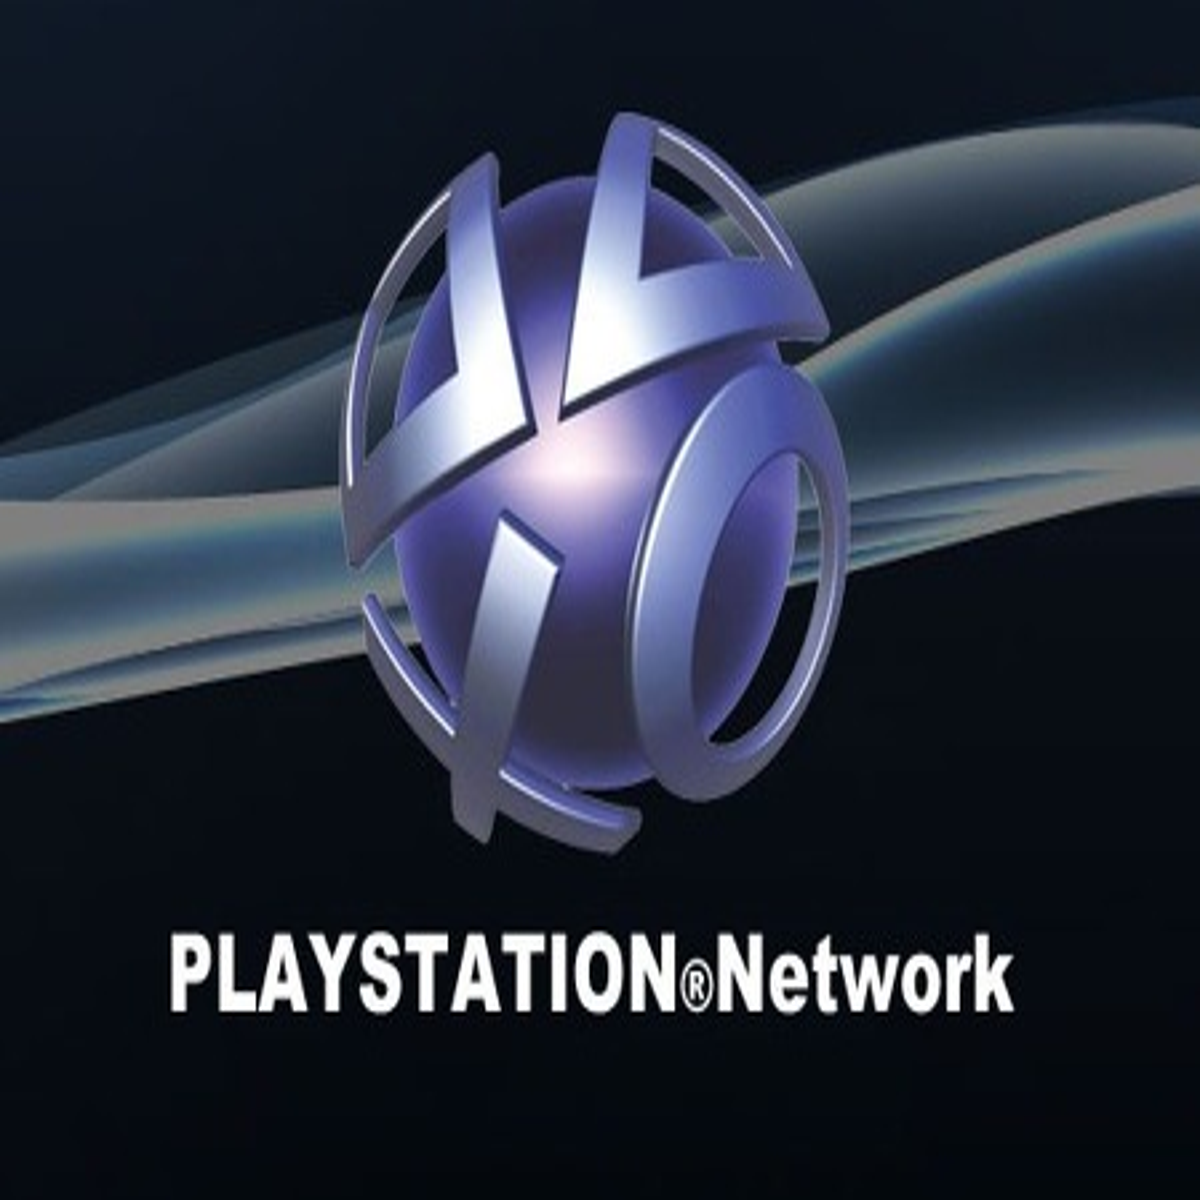 Sony hacked again, this time the PlayStation Network - CNET